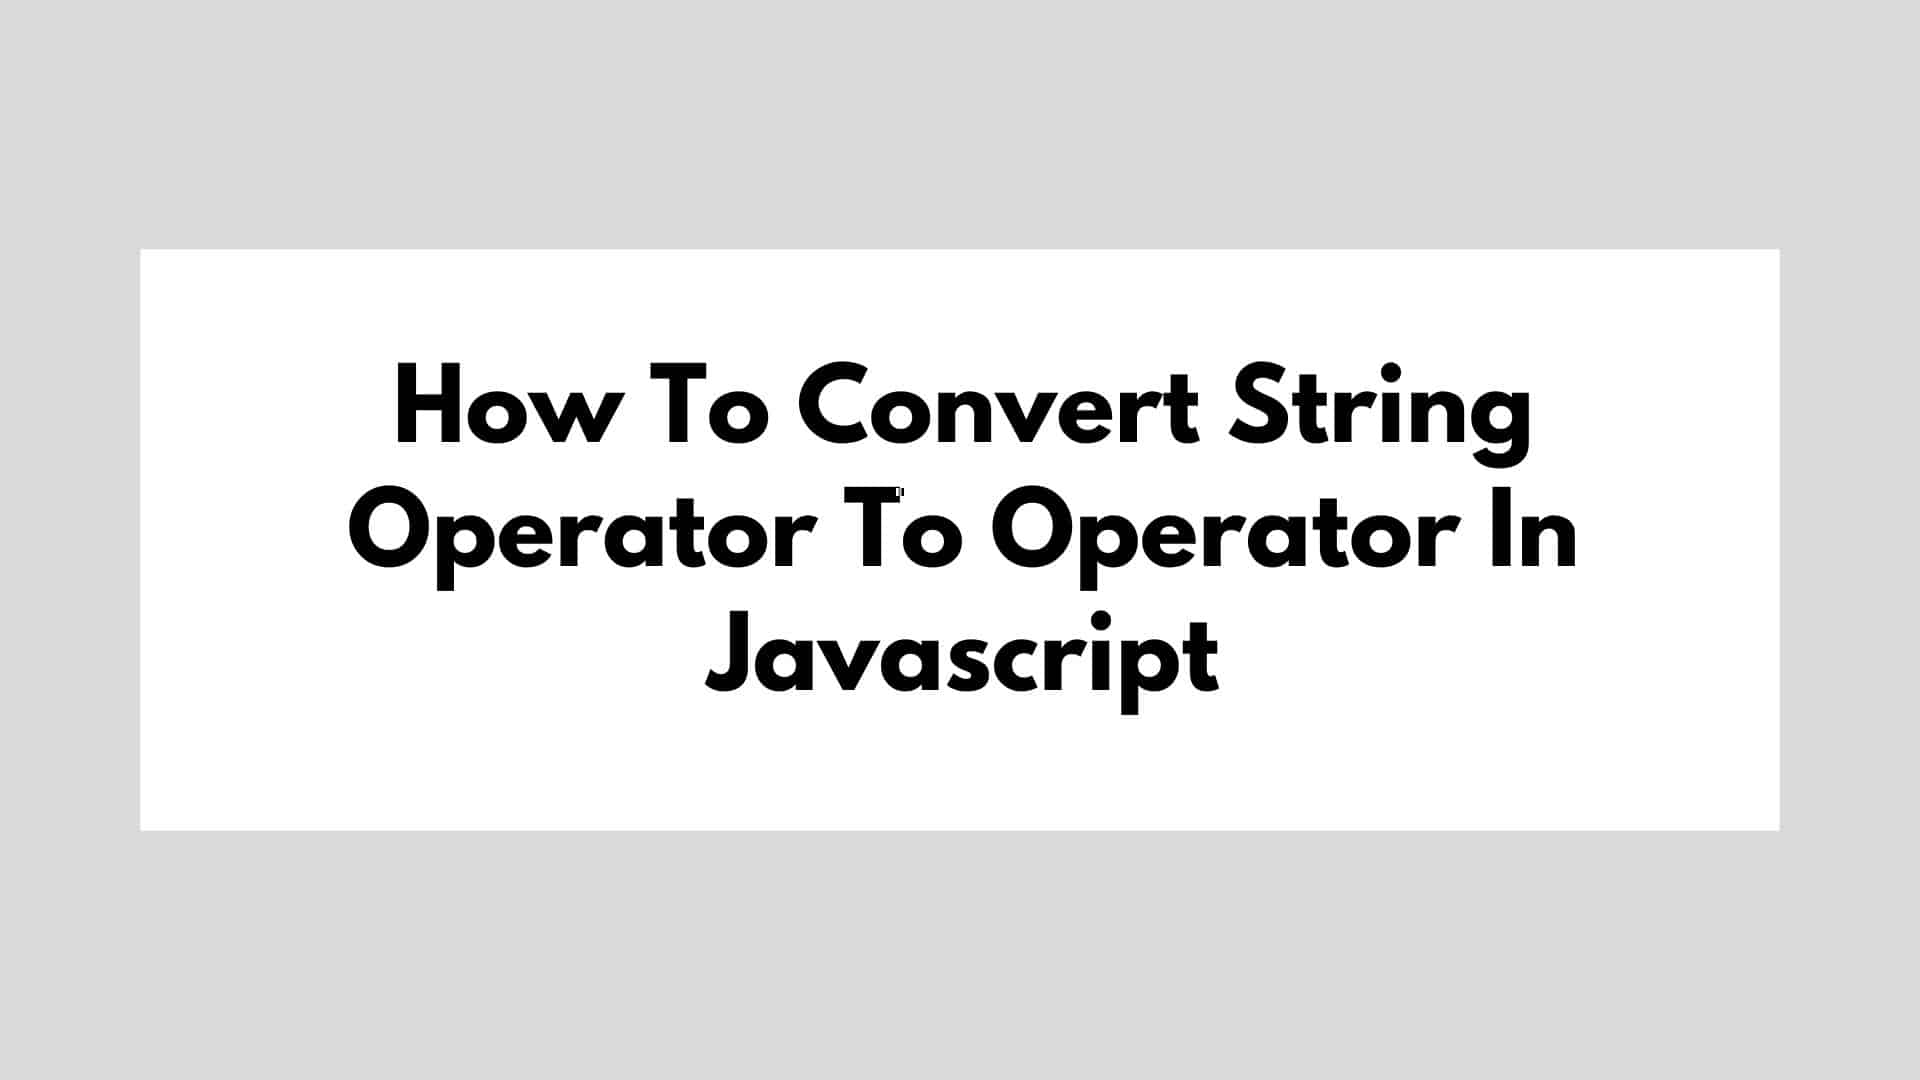 How To Convert String Operator To Operator In Javascript